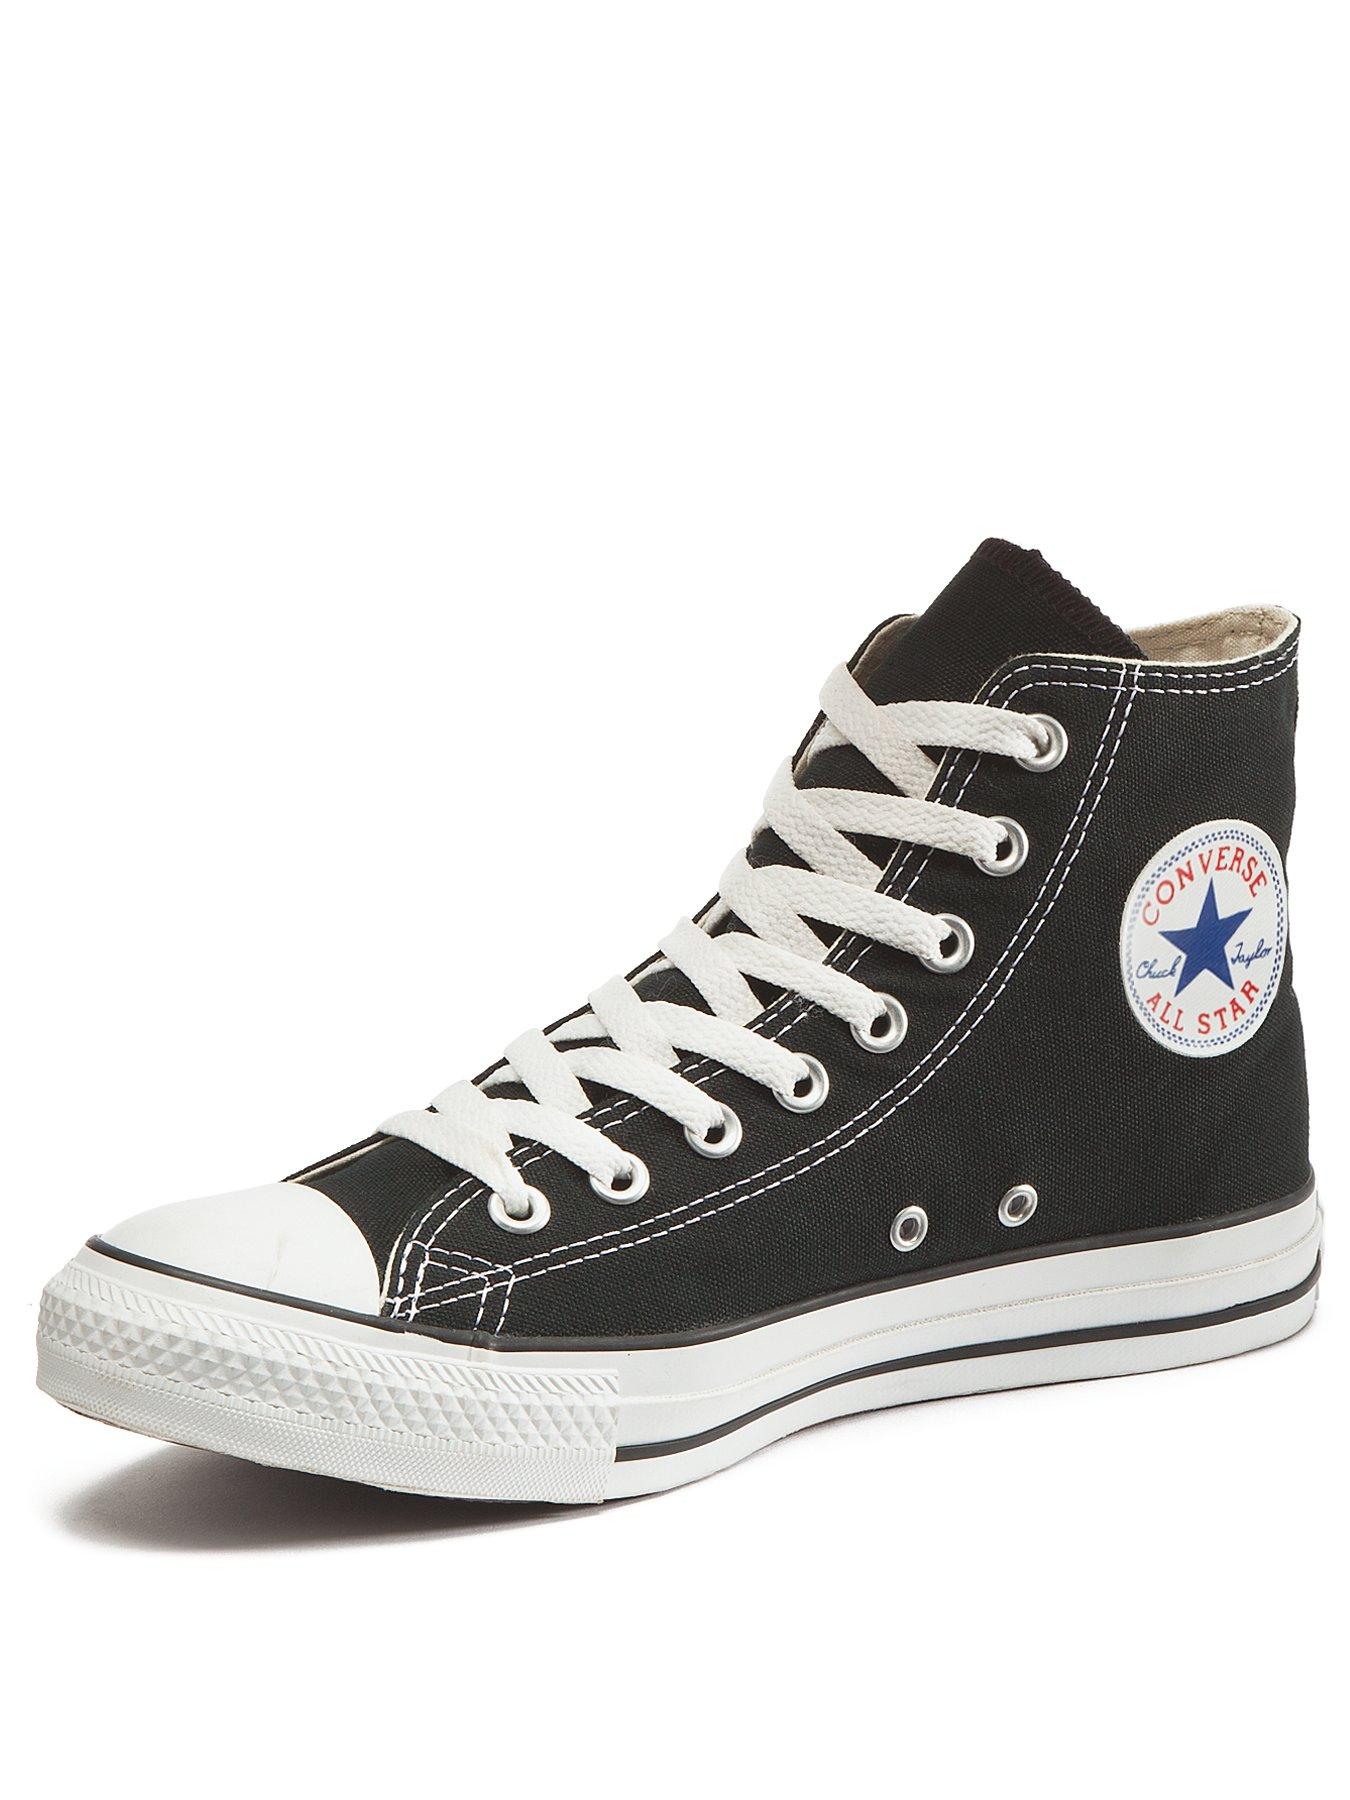 Converse Chuck Taylor All Star | very.co.uk